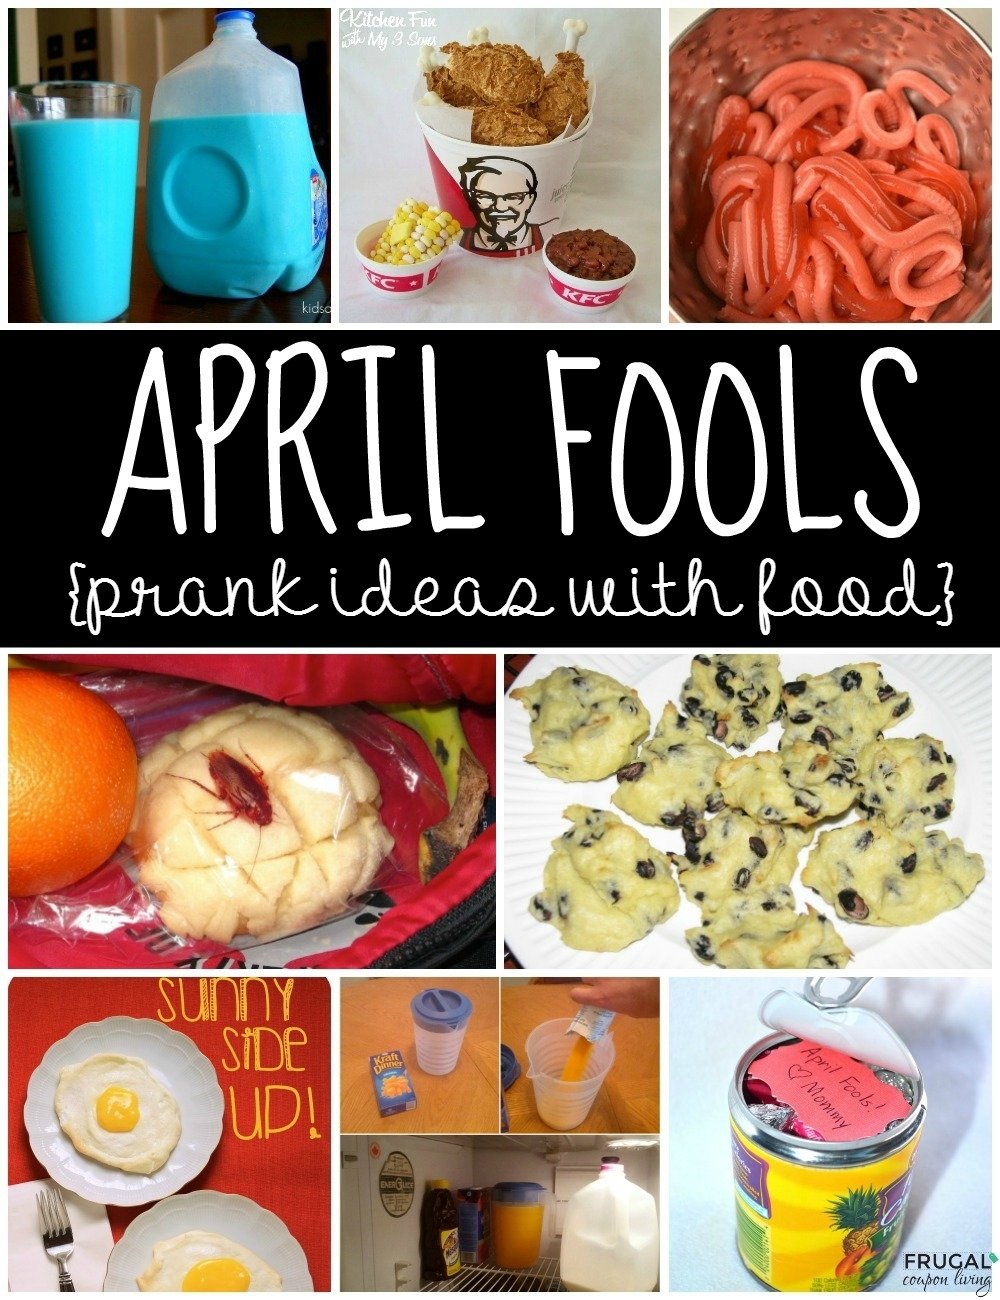 10 Cute April Fools Day Pranks Ideas innocent and playful april fools prank ideas pranks ideas april 2 2022